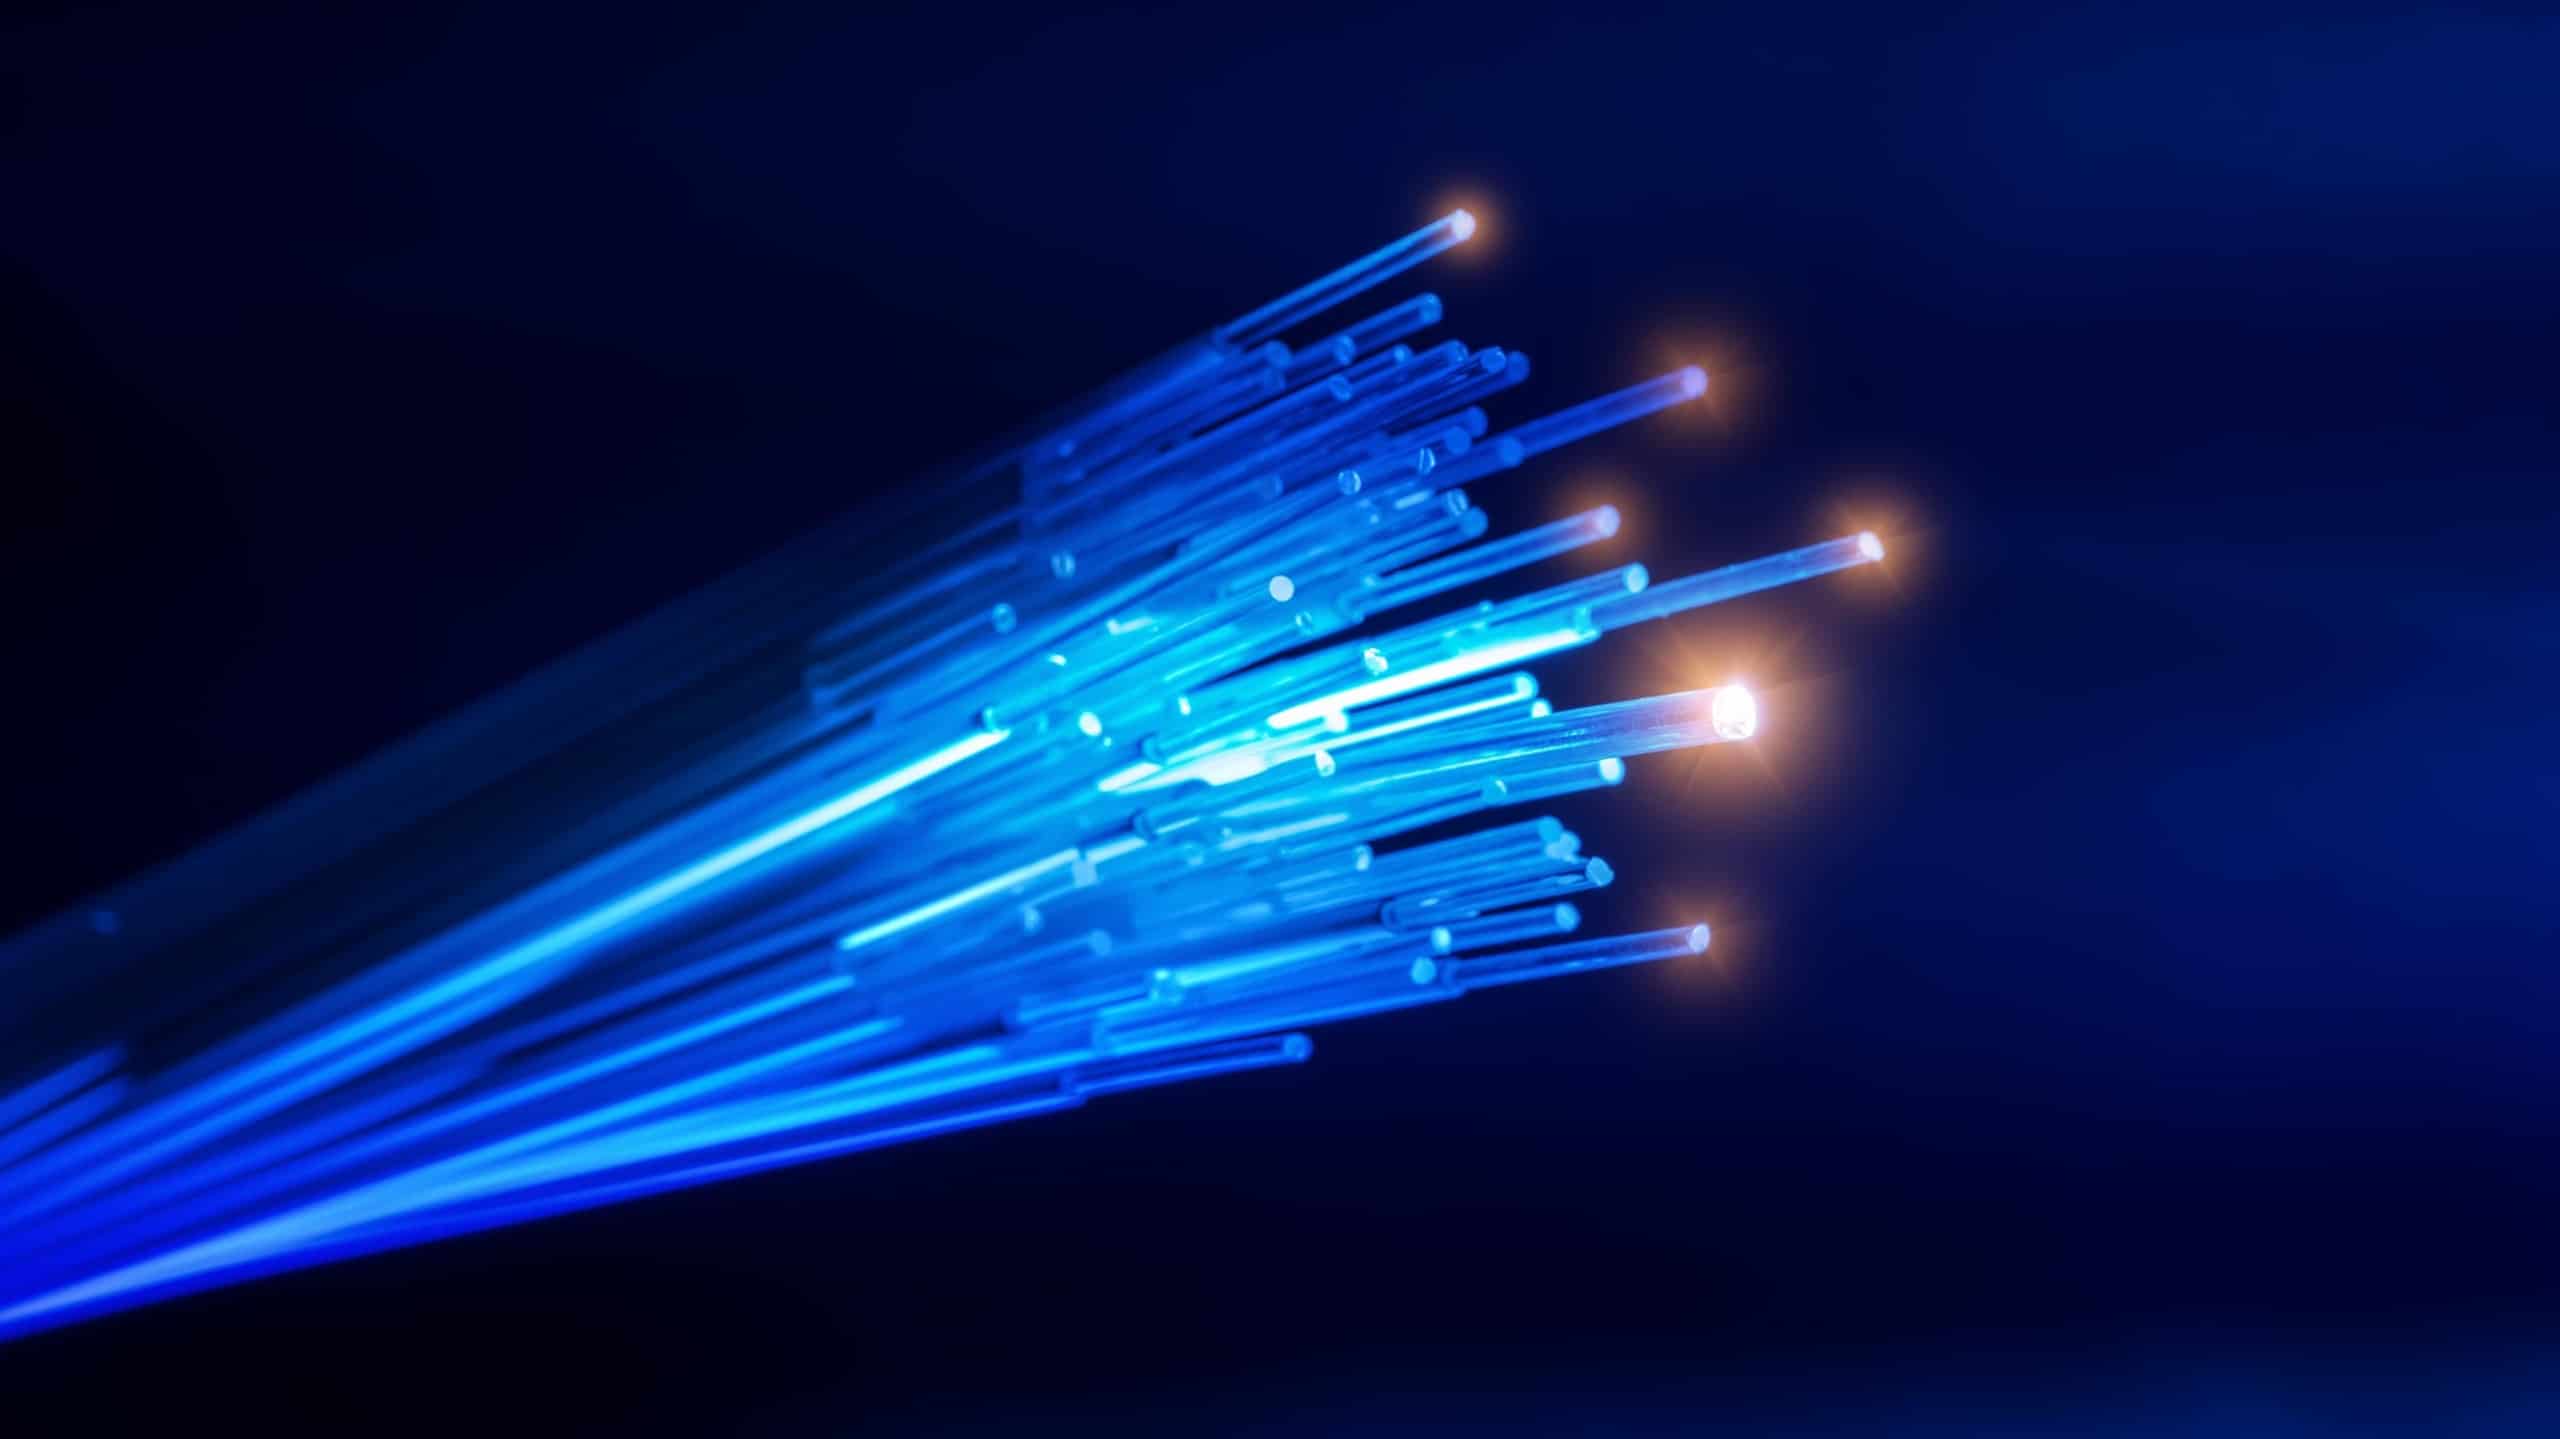 Illustration of a fiber optic cable